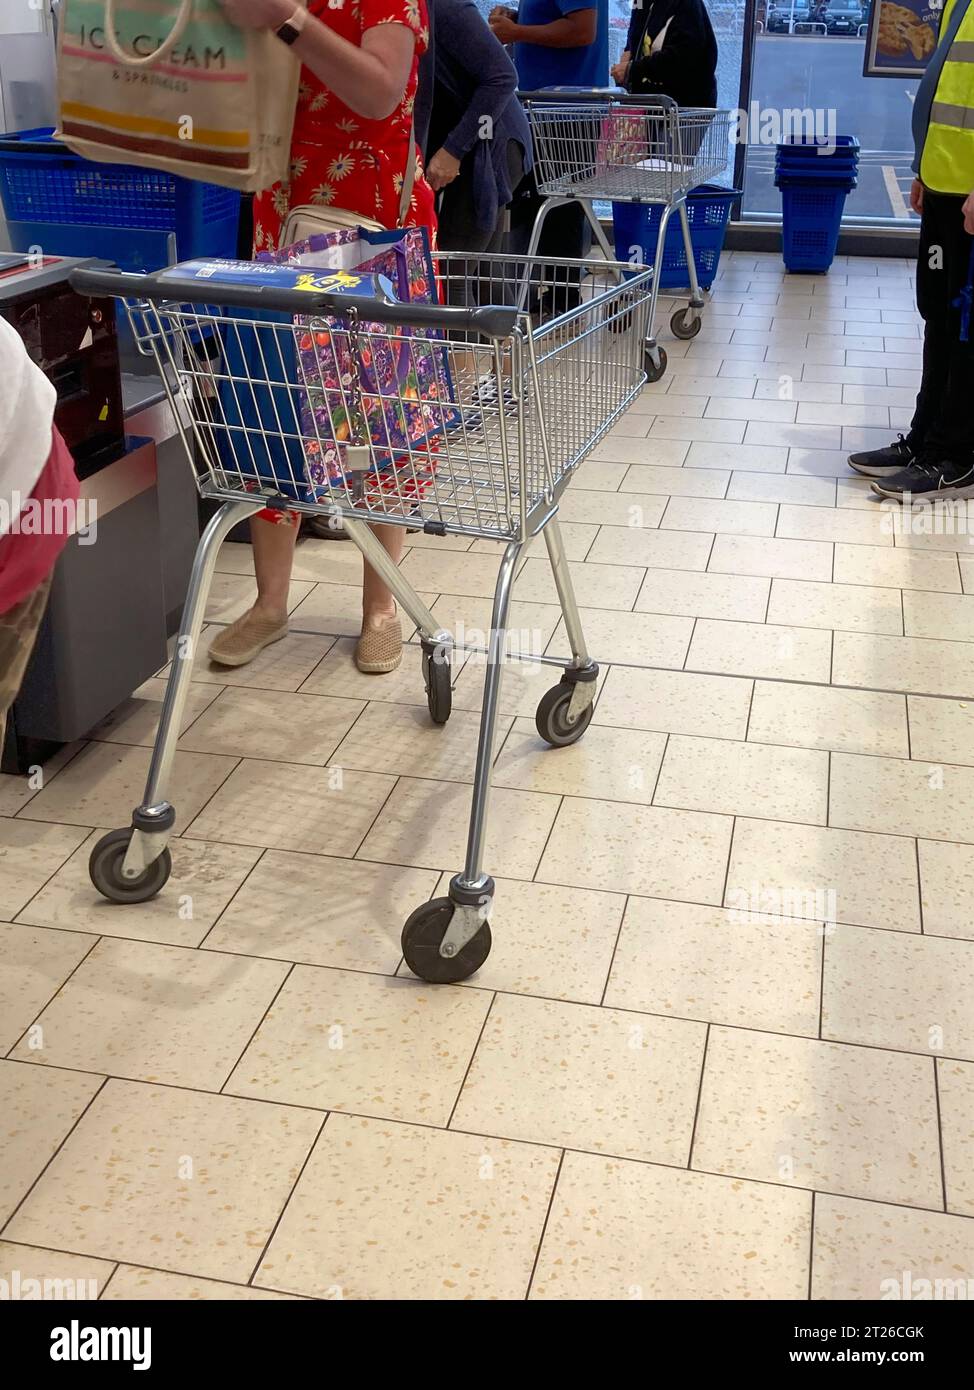 Customers with trolly / trolley / trollies pay at the self service checkout / check out tills (meant for basket use) at a Lidl supermarket. UK. (135) Stock Photo